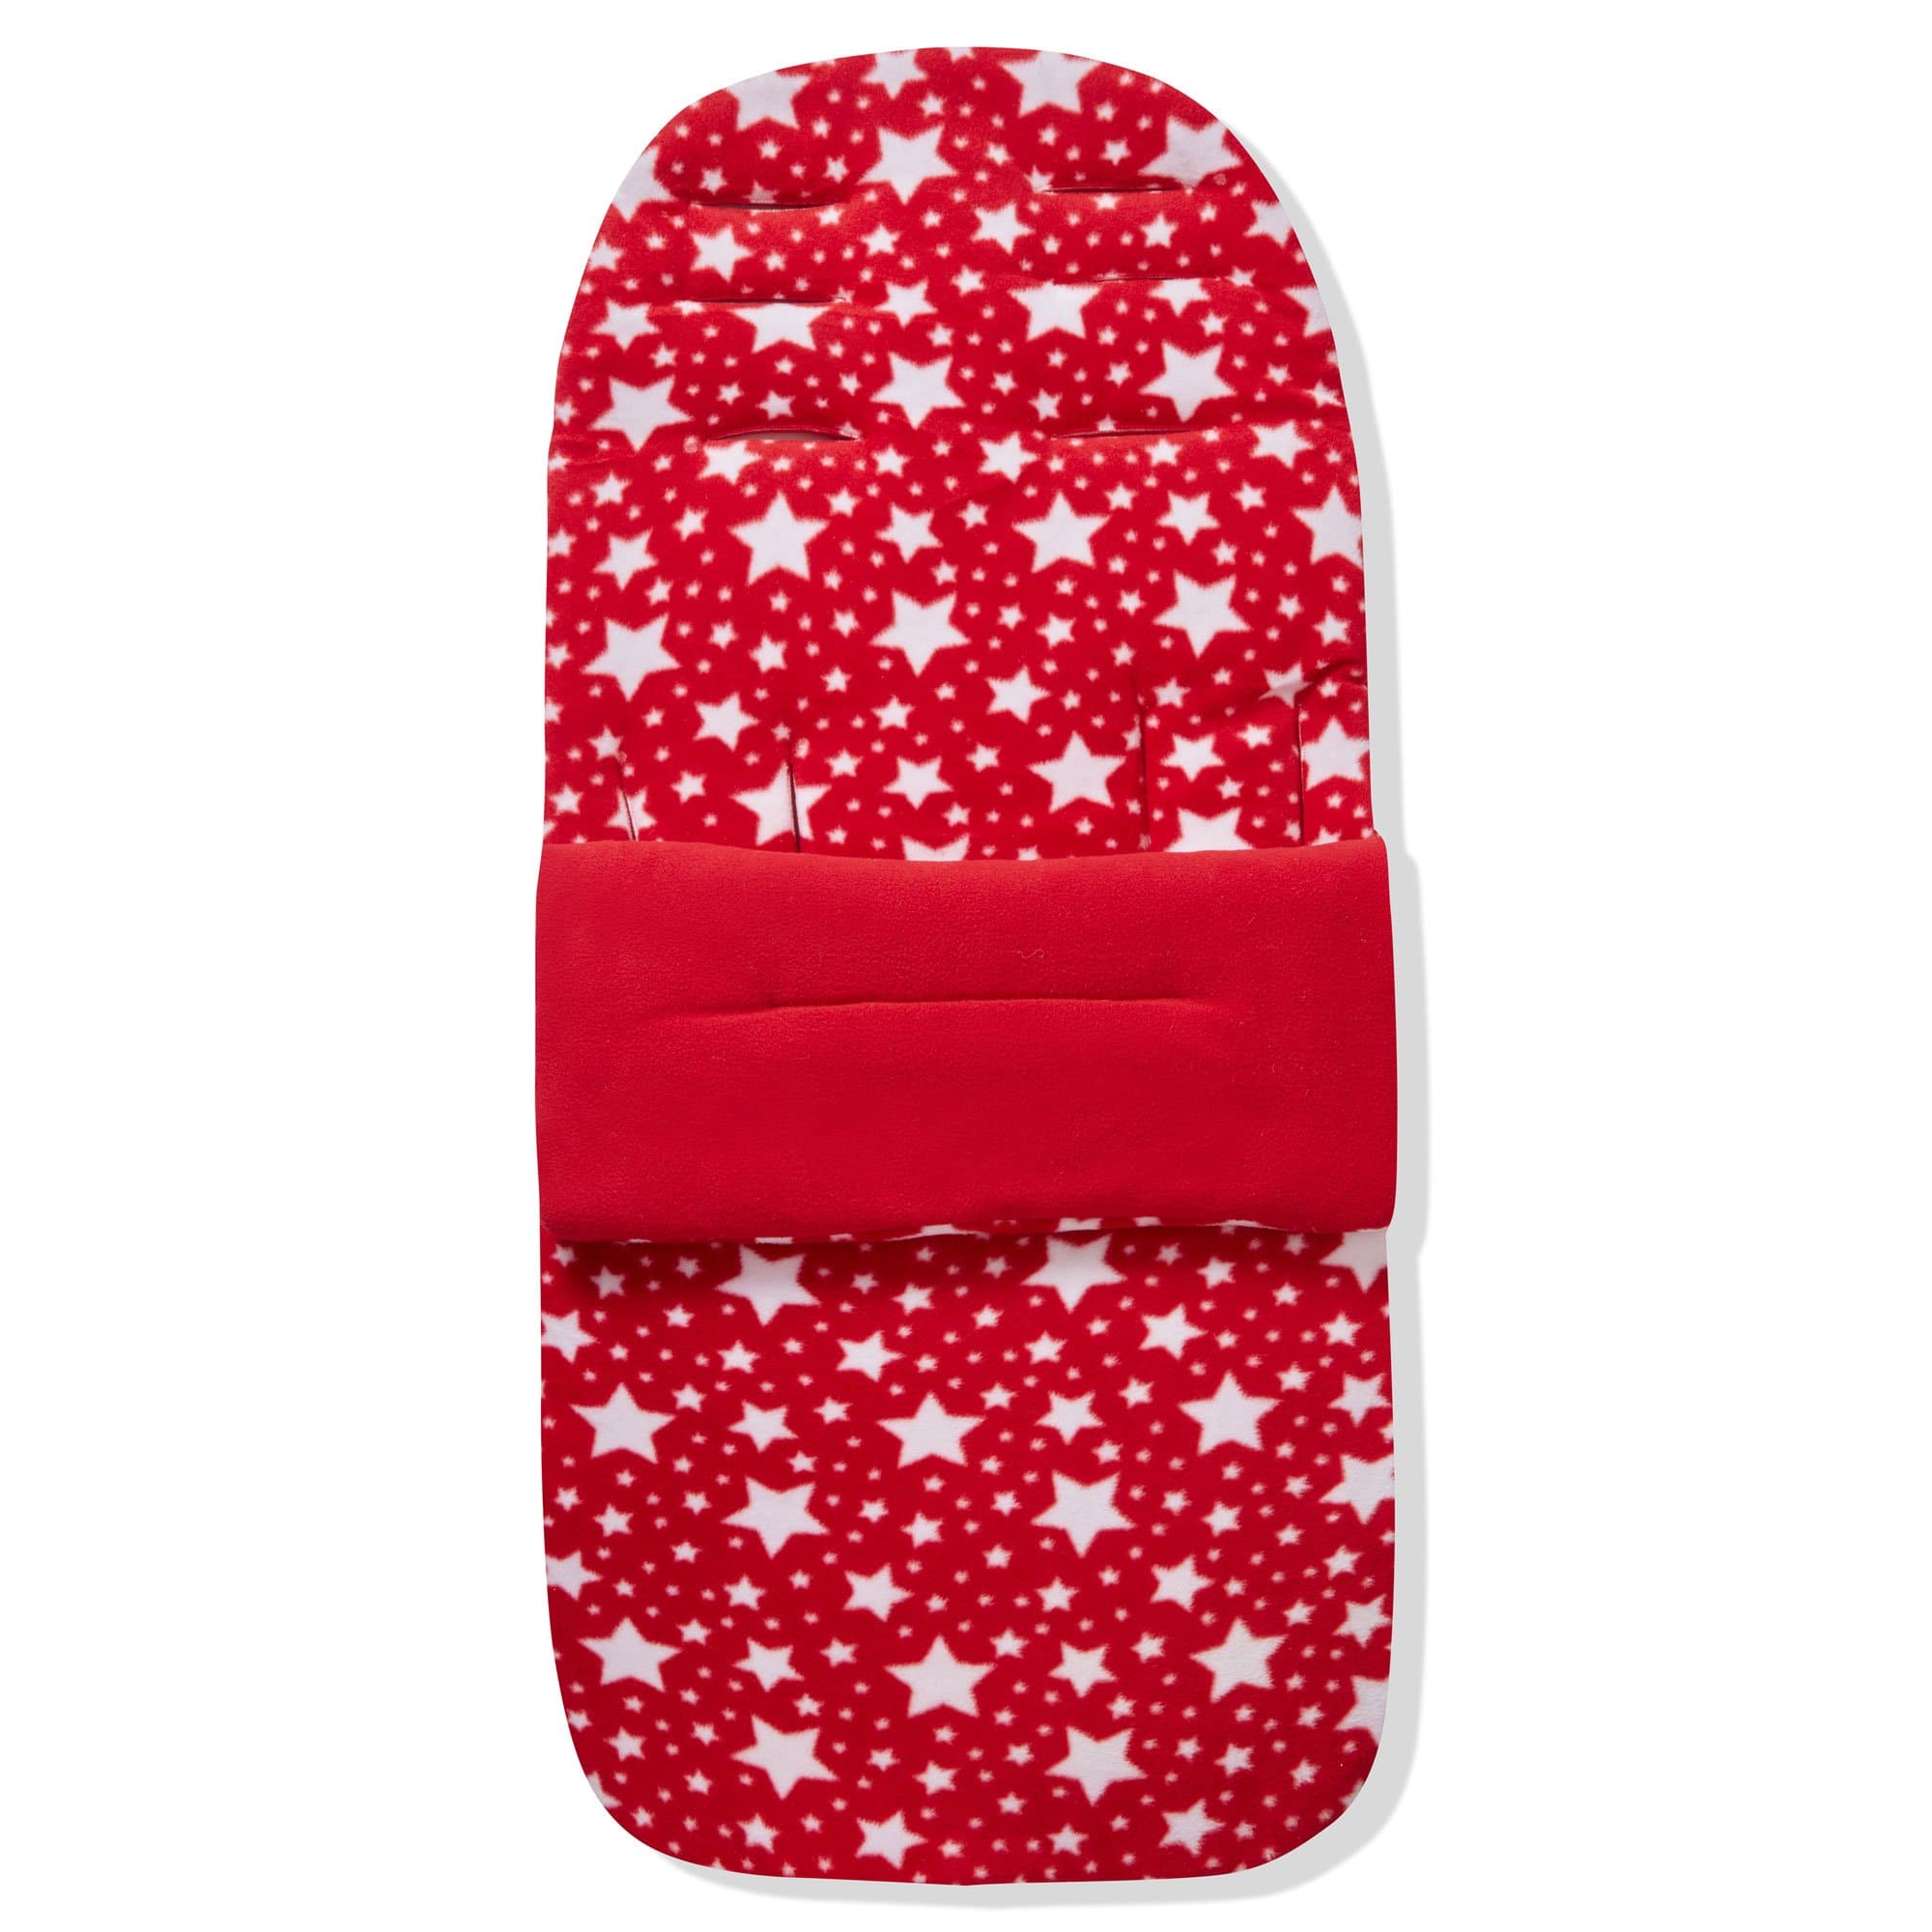 Fleece Footmuff / Cosy Toes Compatible with BabySun - Red Star / Fits All Models | For Your Little One